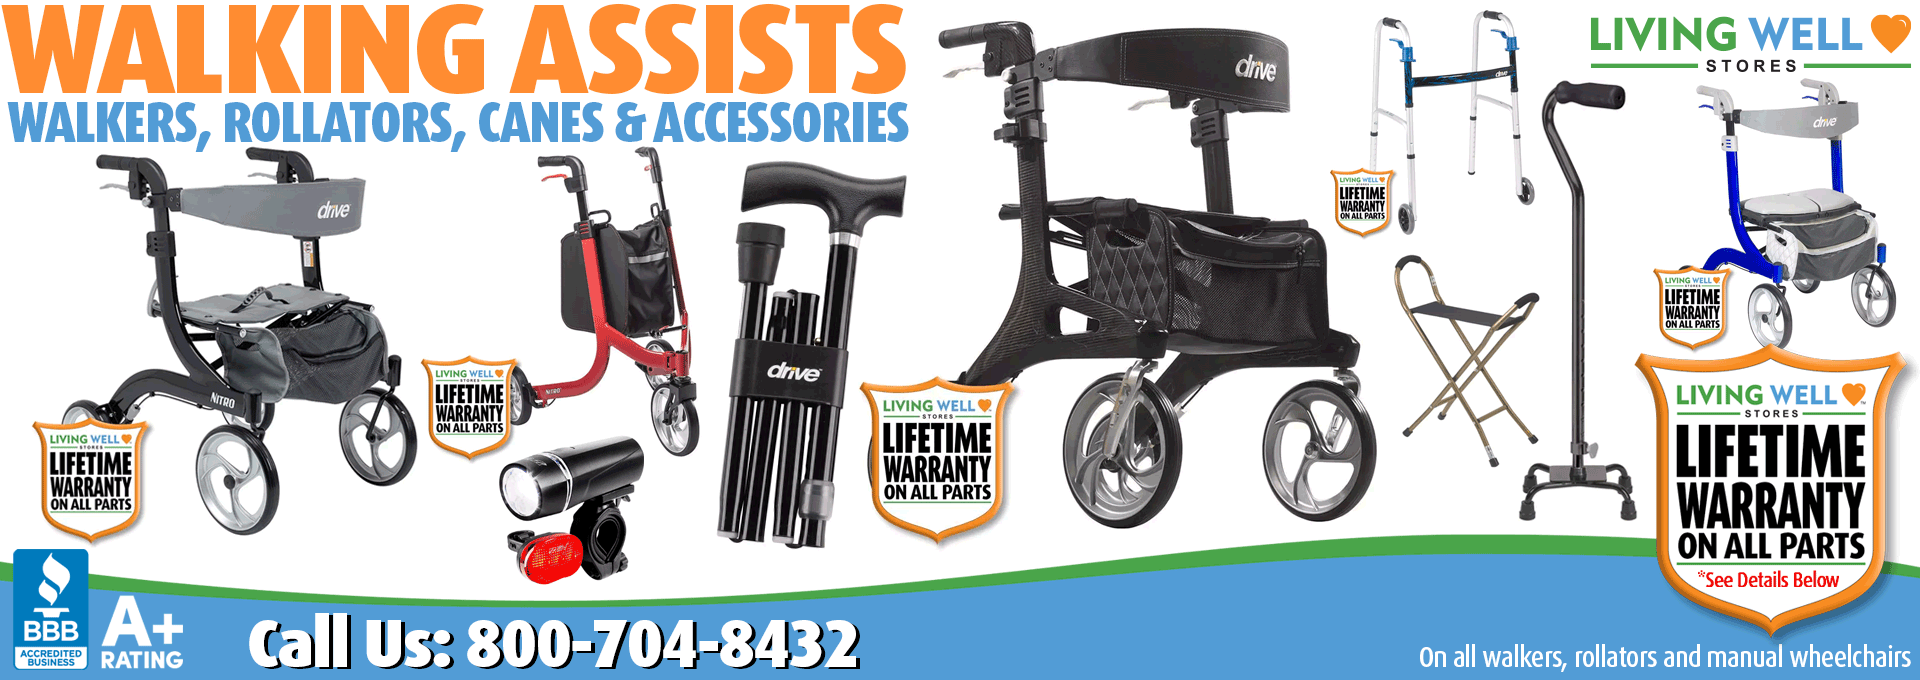 Living Well Stores: Featuring the very best selection of Walking Assist Products: Walkers, Rollators, Manual Wheelchairs, Canes and Accessories